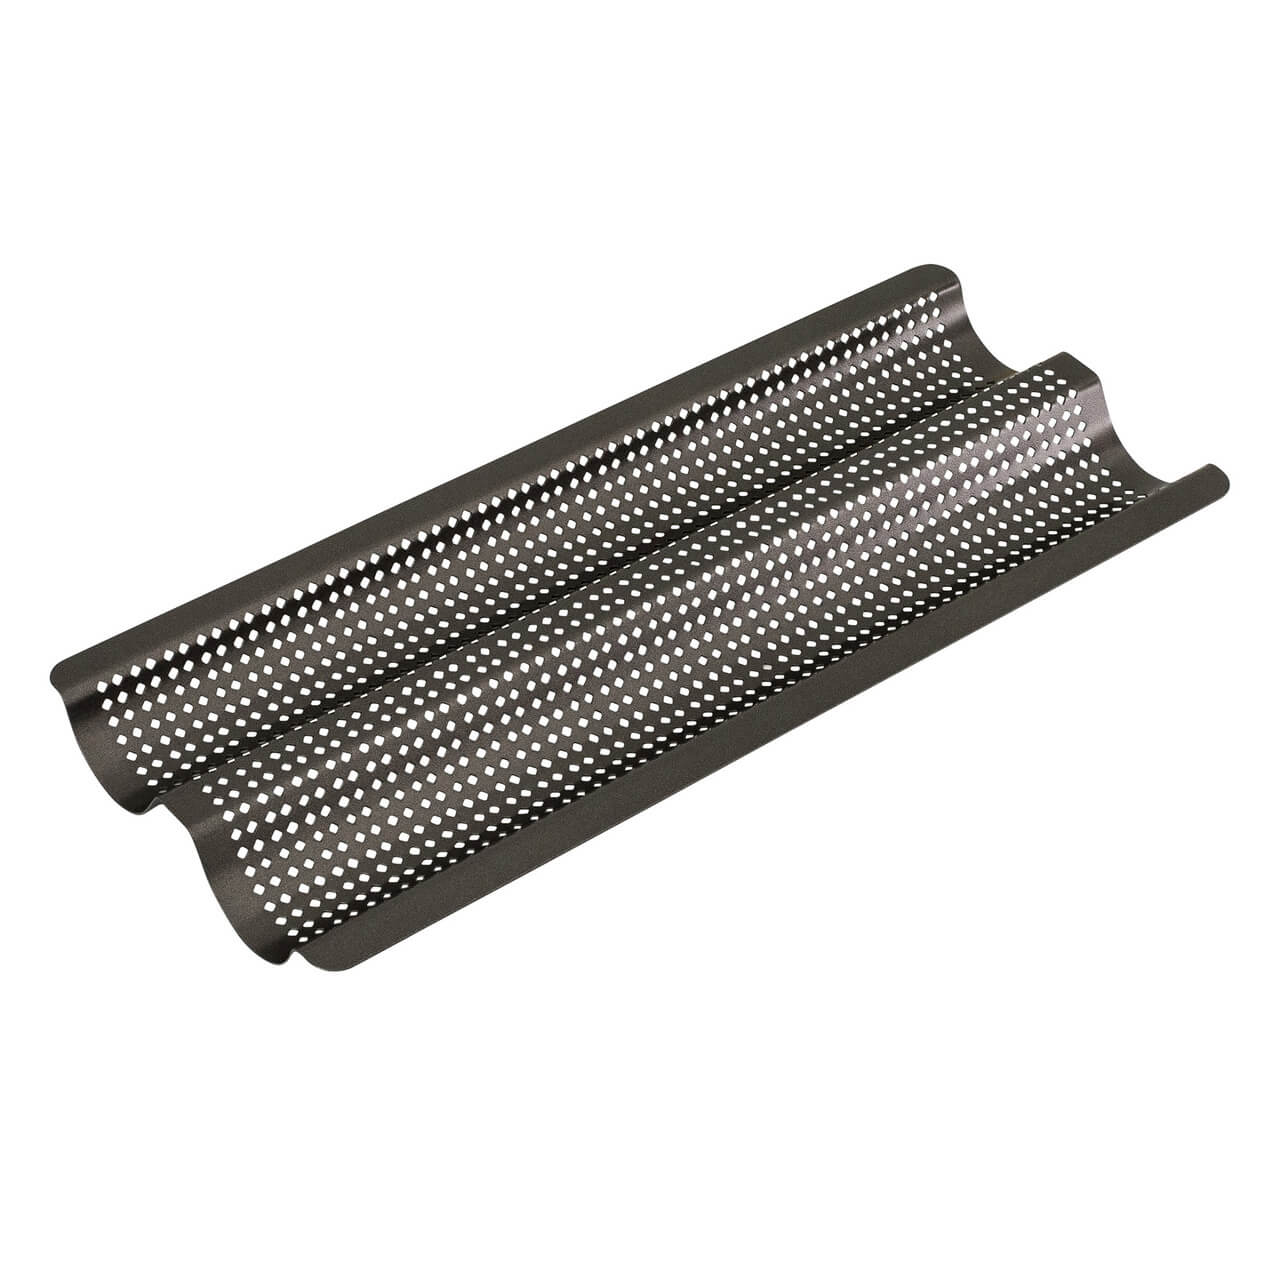 Bakemaster Perfect Crust Baguette Tray 39x16x2.5cm